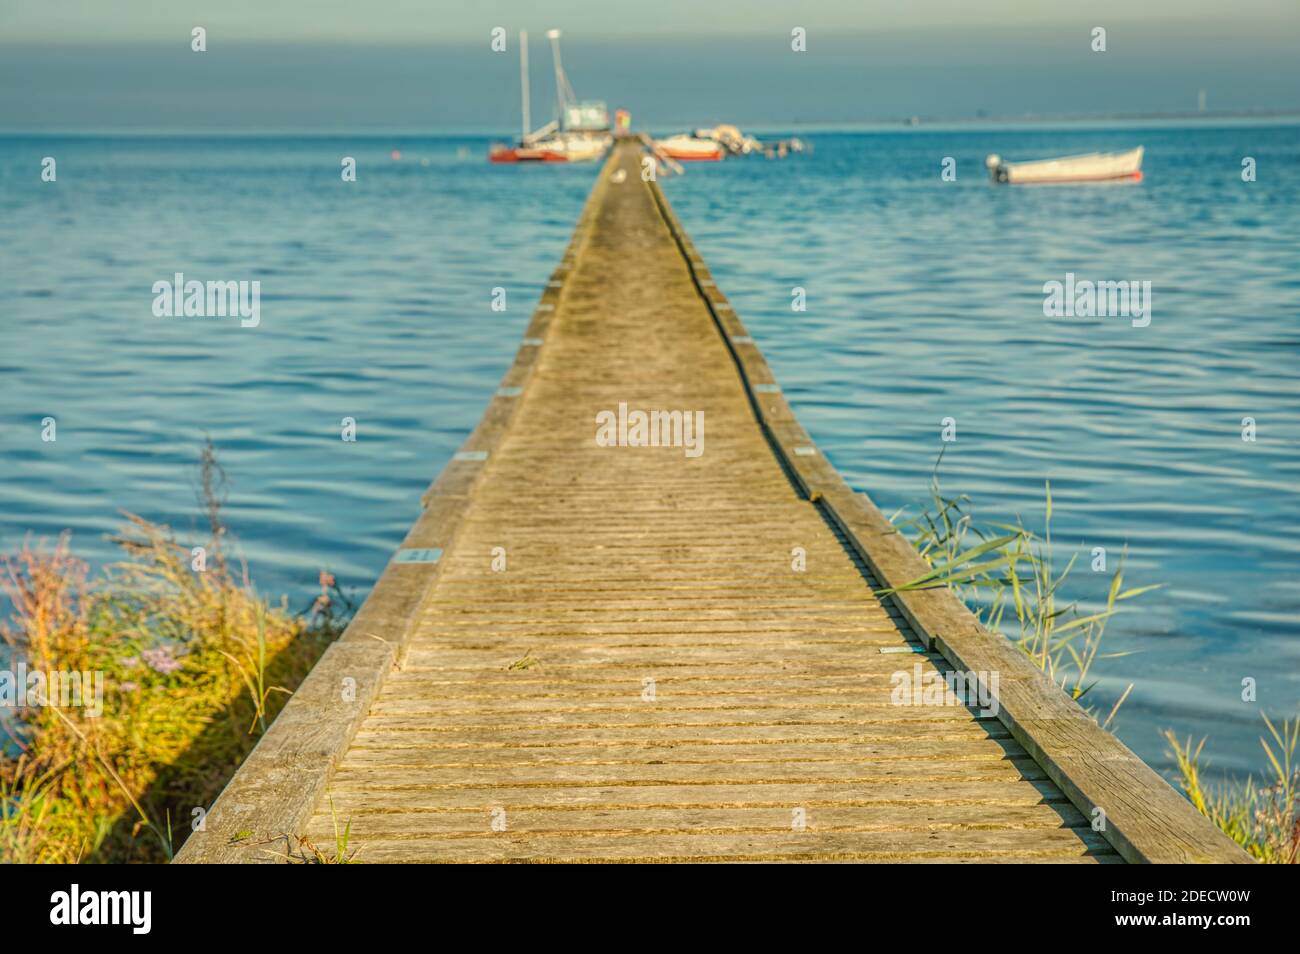 Wooden pier or jetty over the Baltic sea with mooring boats provides an illustration for summer vacation. Boardwalk or wharf conveys purpose concept Stock Photo